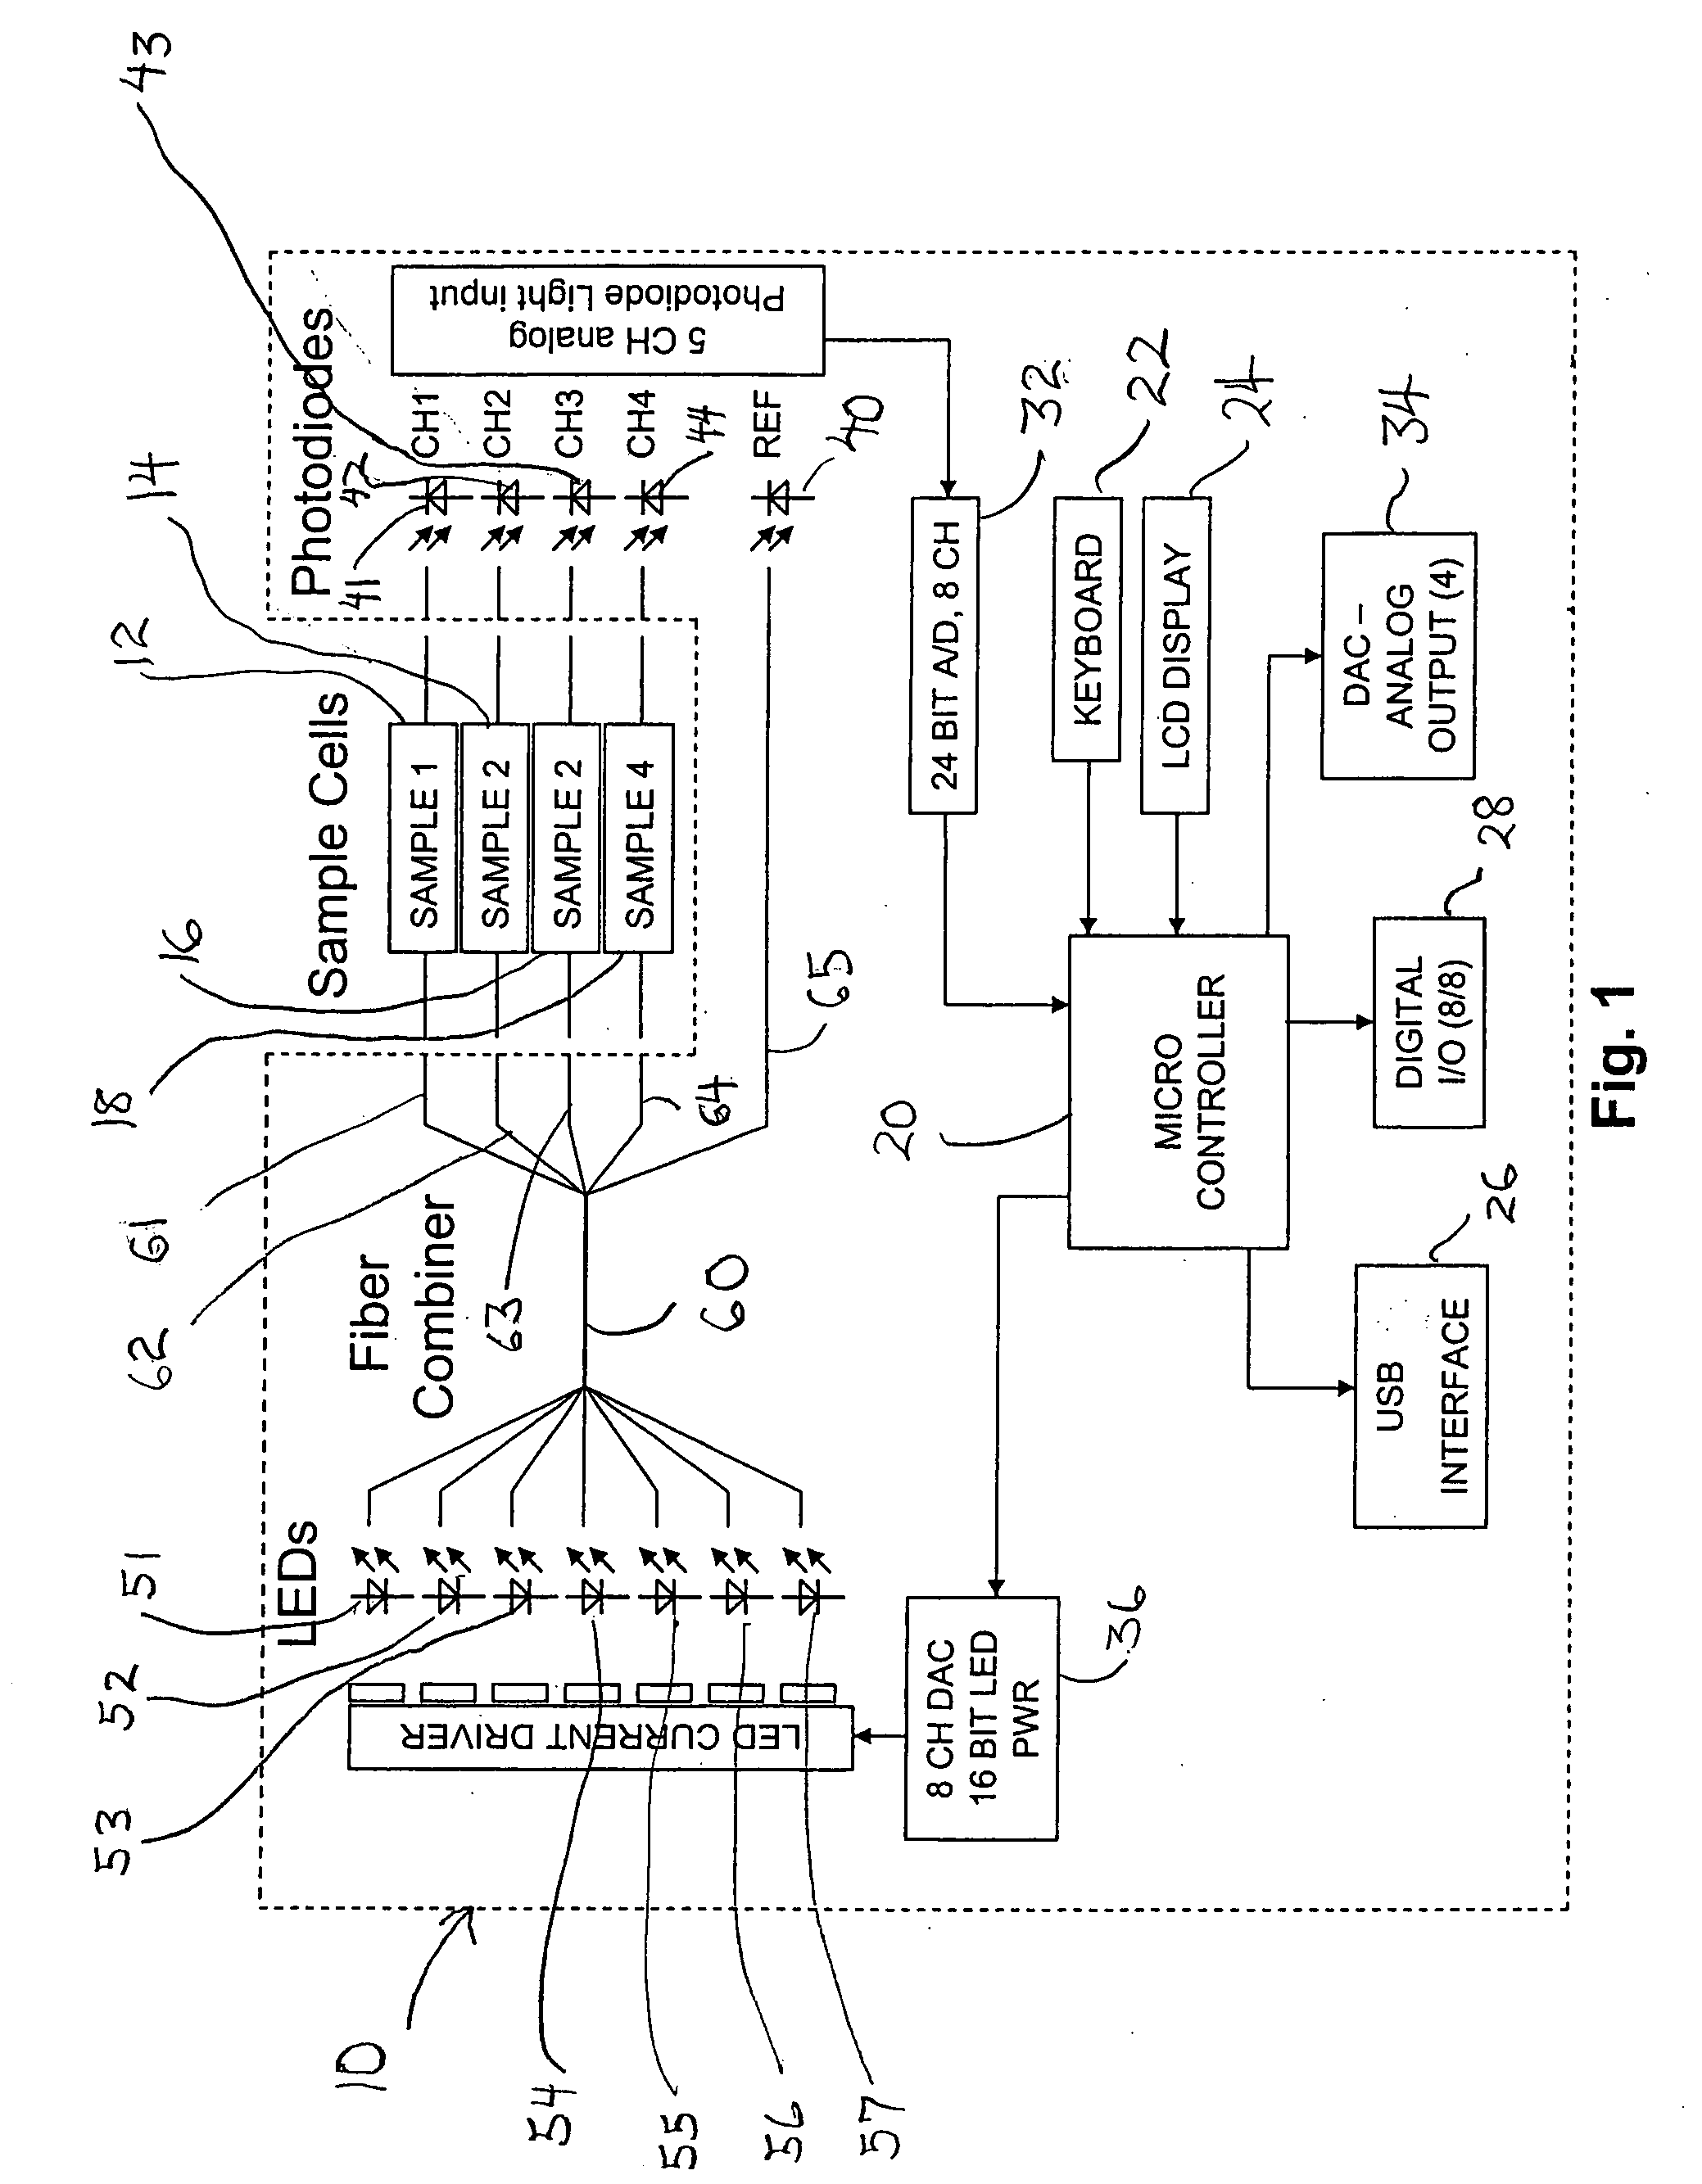 Self referencing LED detection system for spectroscopy applications